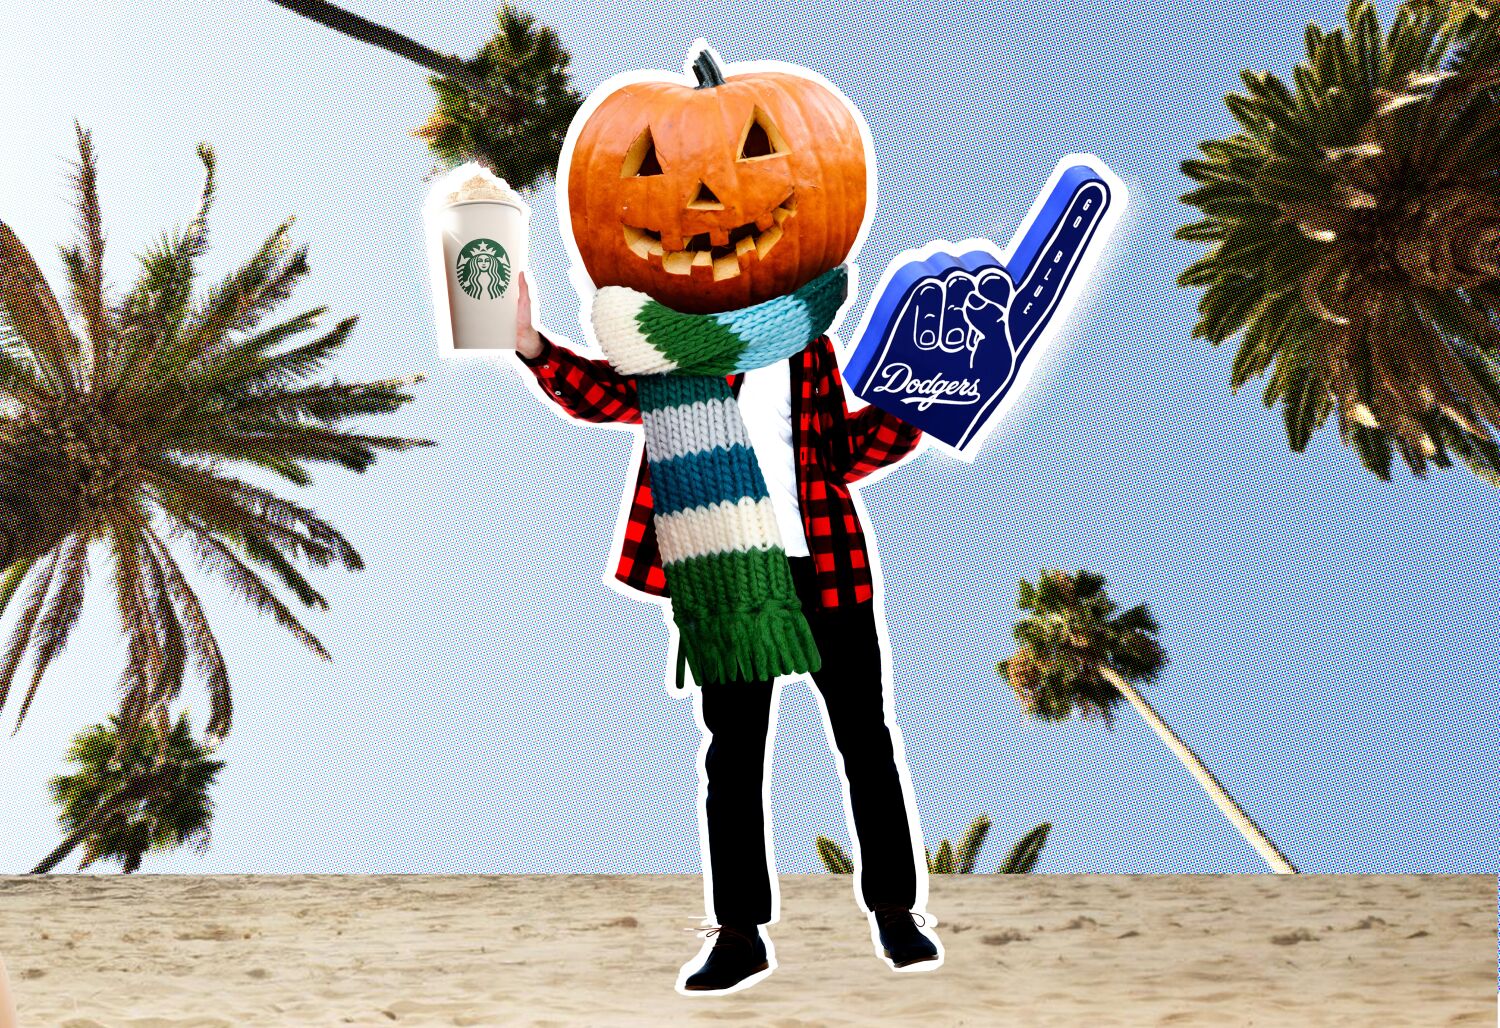 How you can tell it's fall in L.A., according to a guy from Vermont